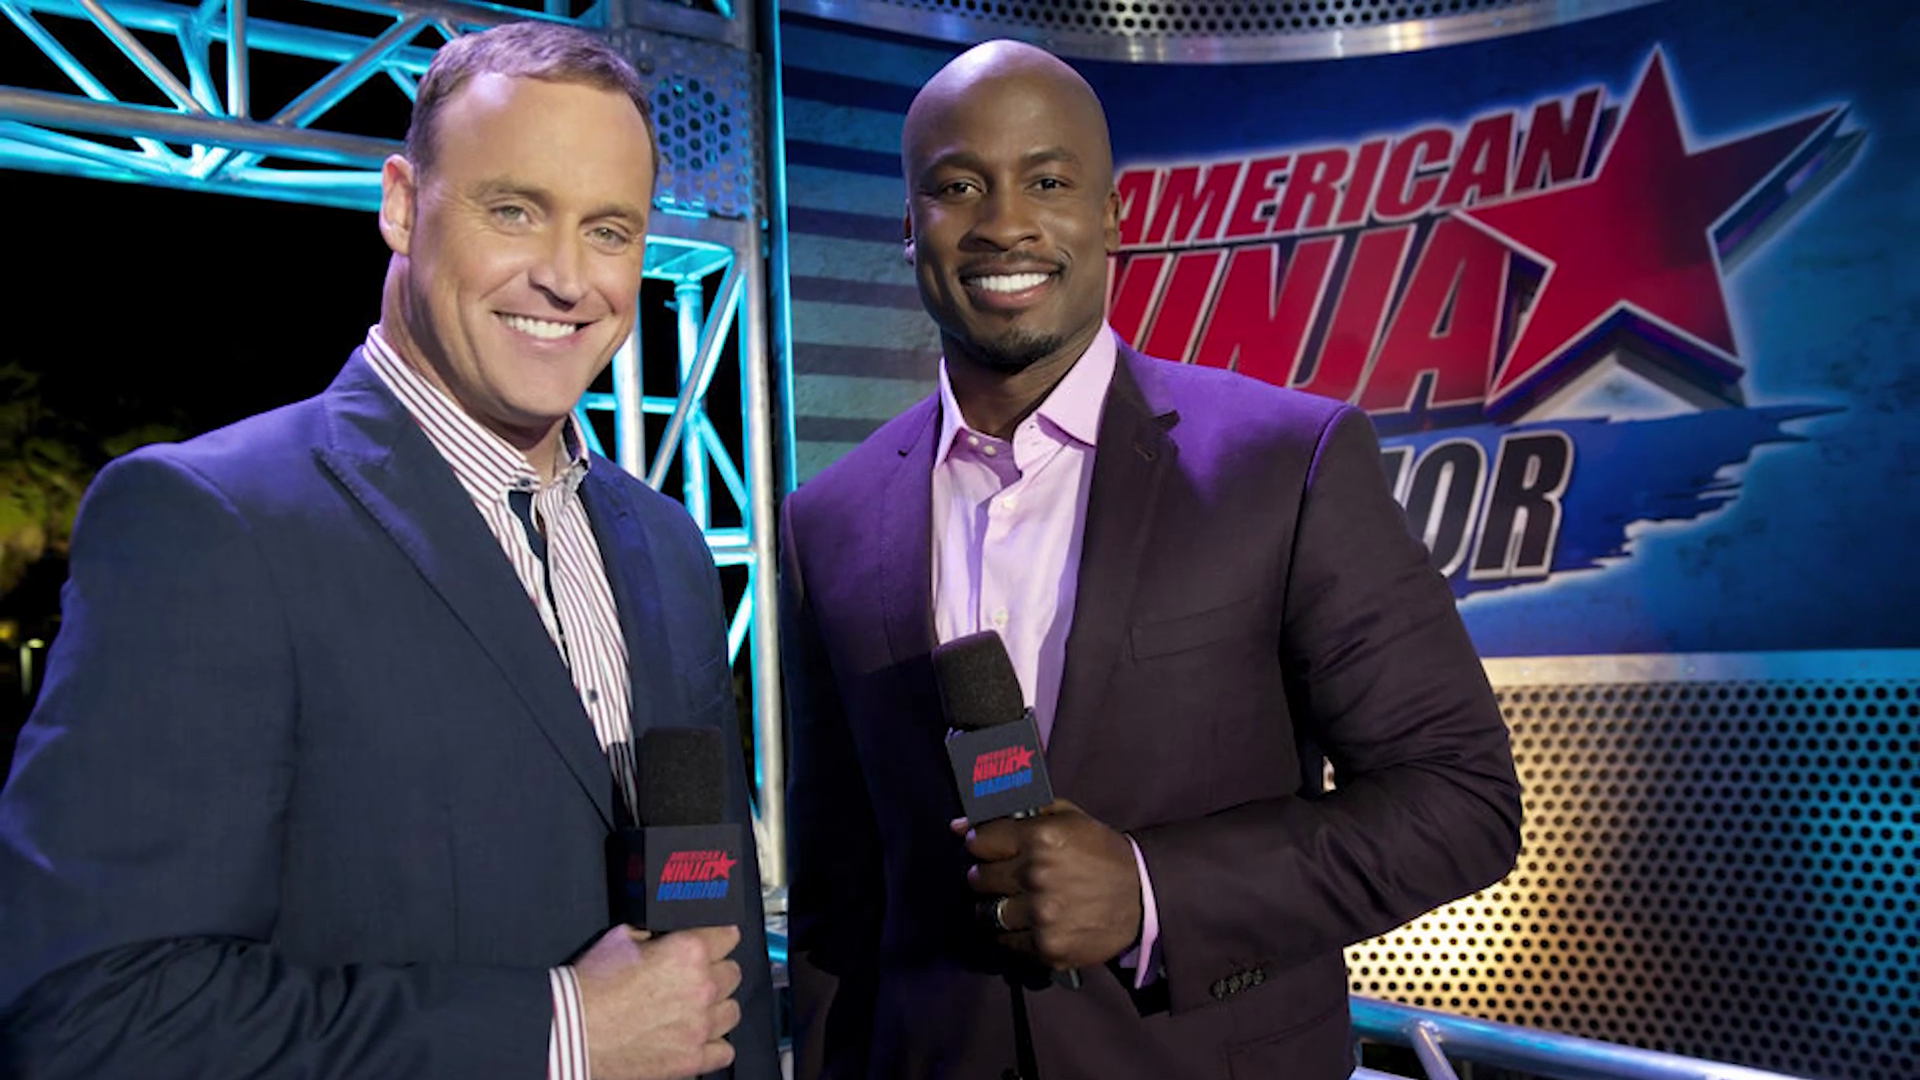 American Ninja Warrior host's life story has been filled with obstacles